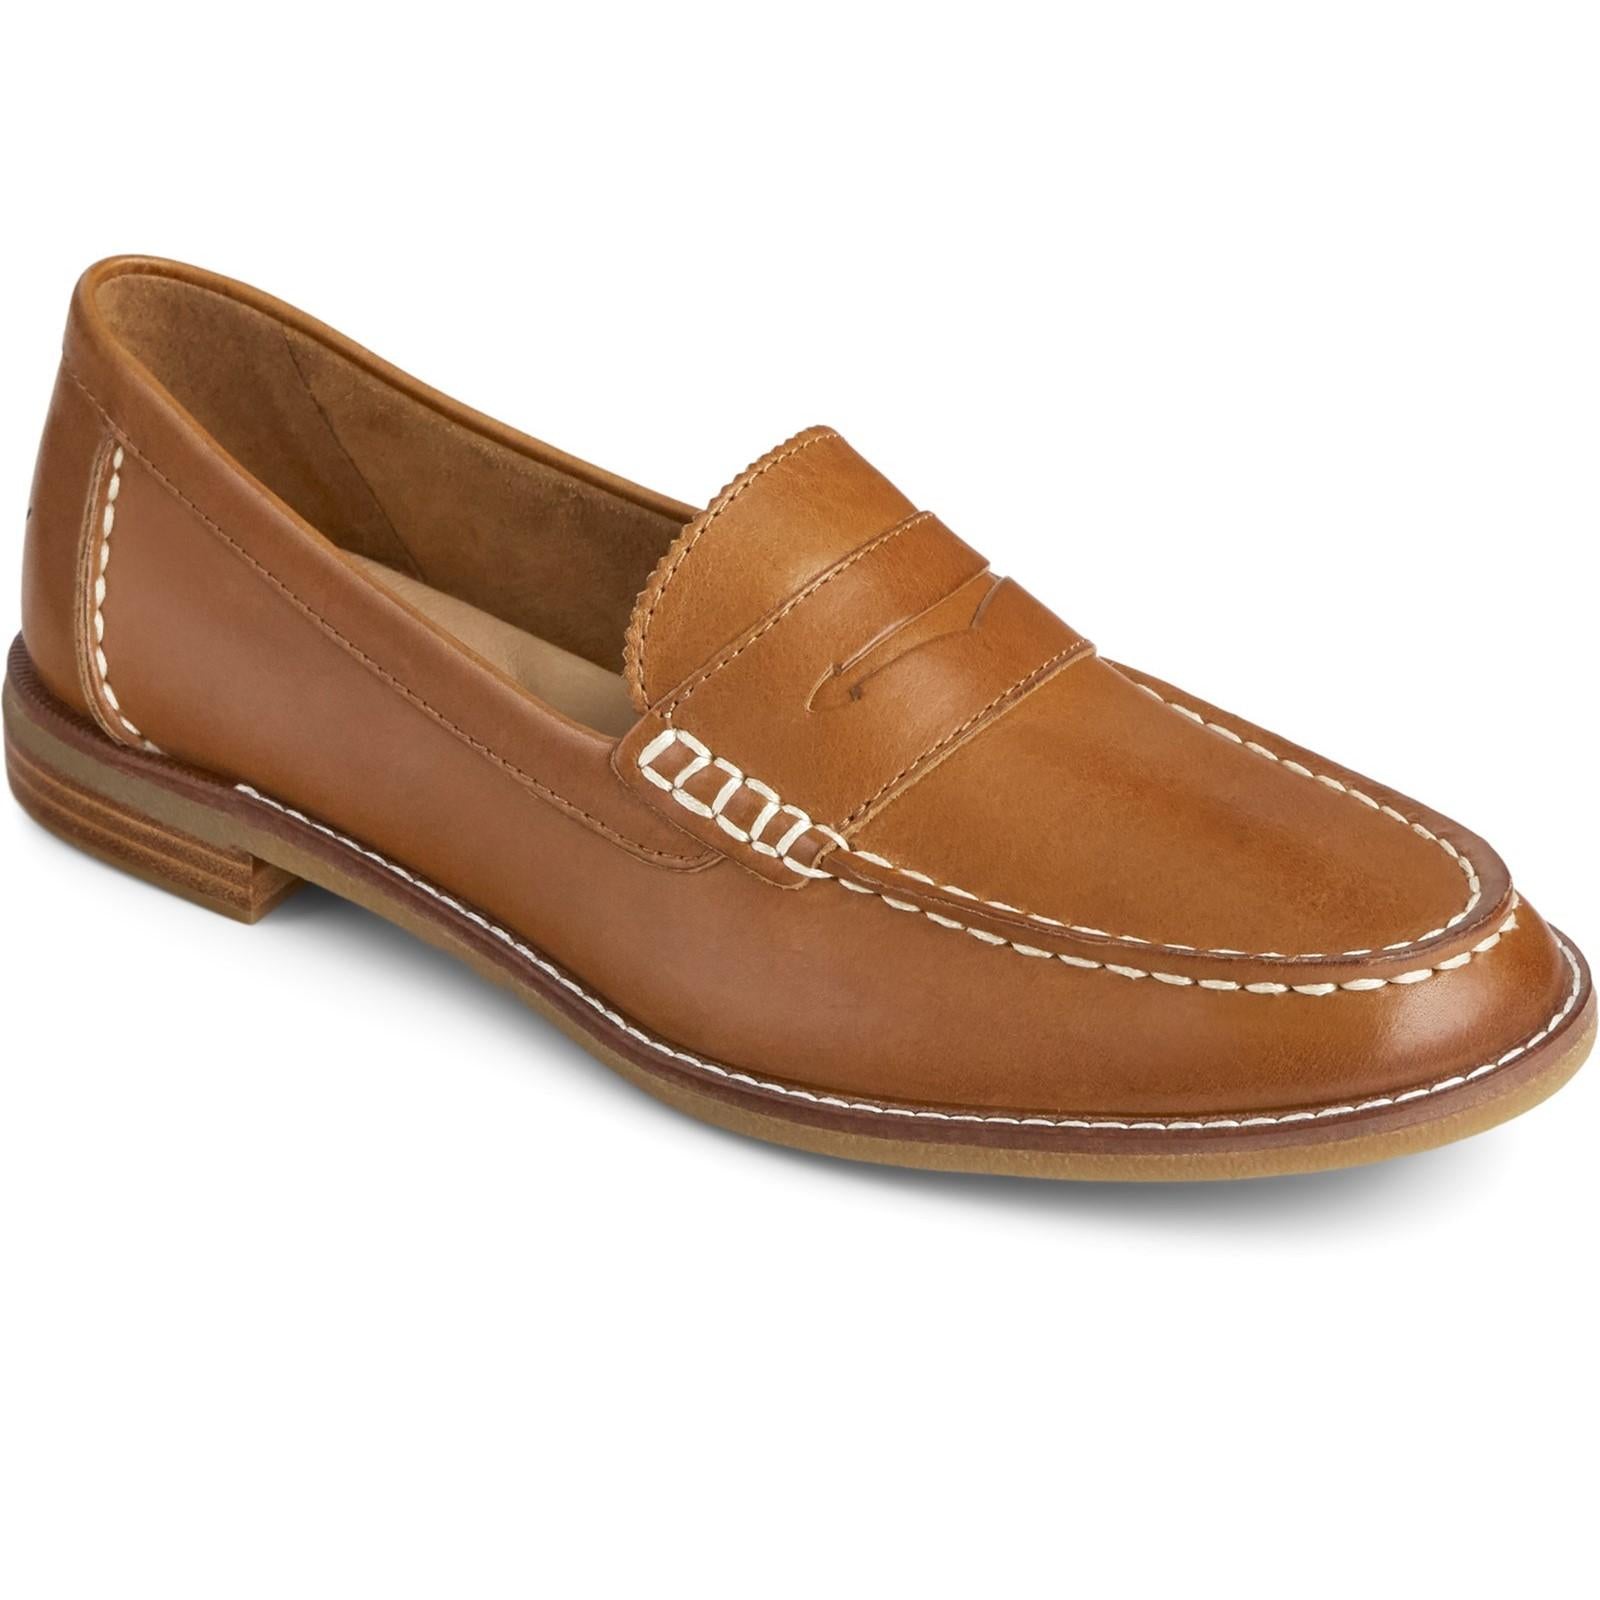 Sperry Seaport Penny Loafer Flats